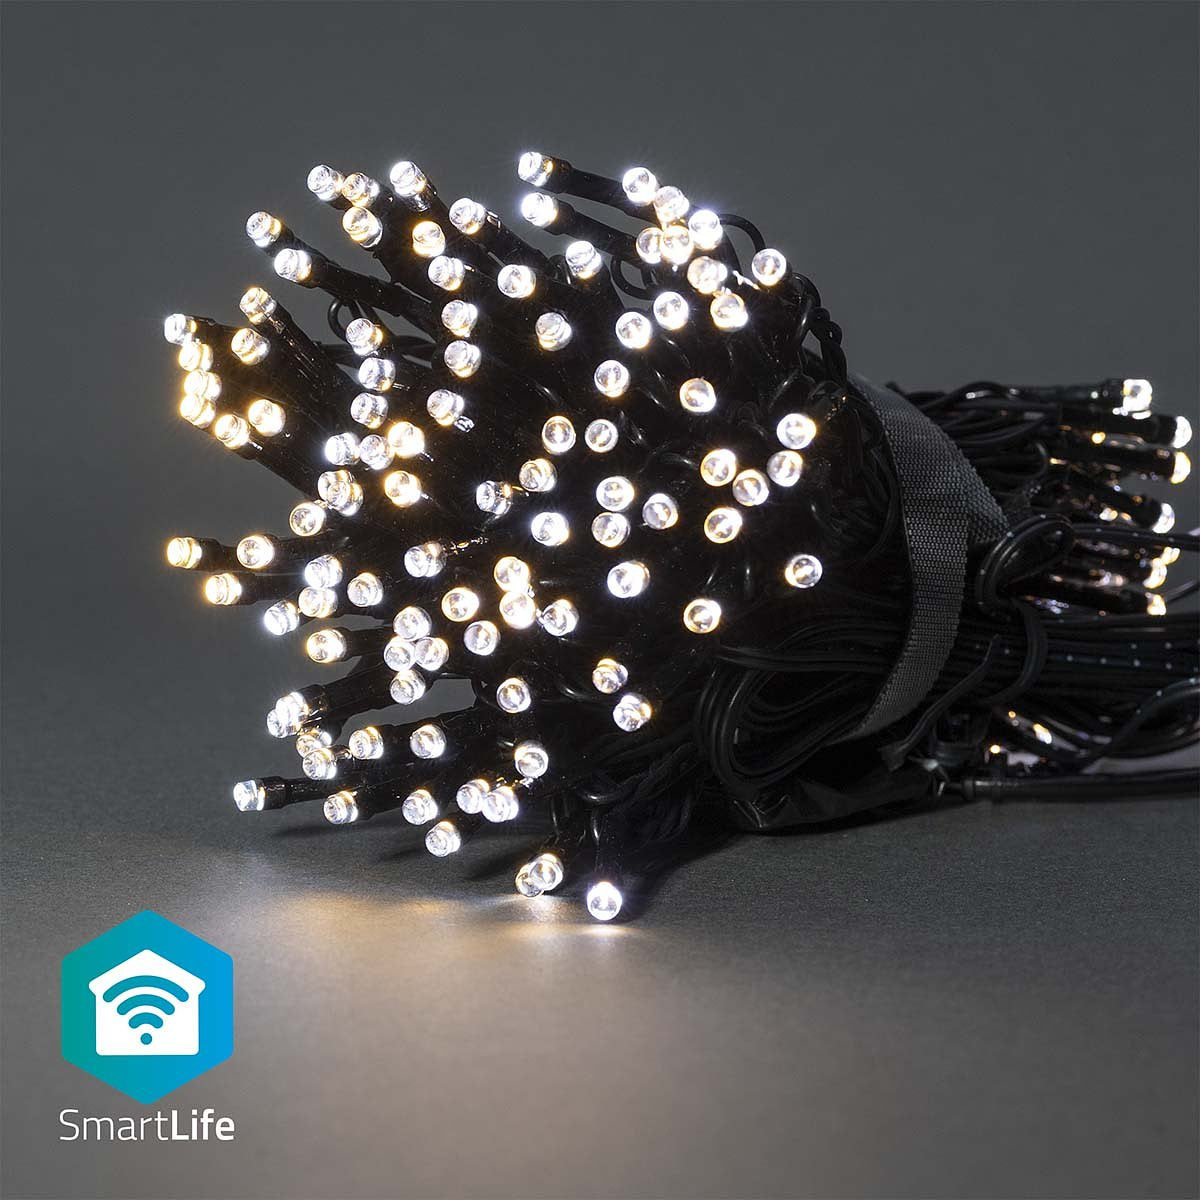 Nedis SmartLife Decoratieve LED | Wi-Fi | Warm tot koel wit | 200 LED's | 20.0 m | Android / IOS